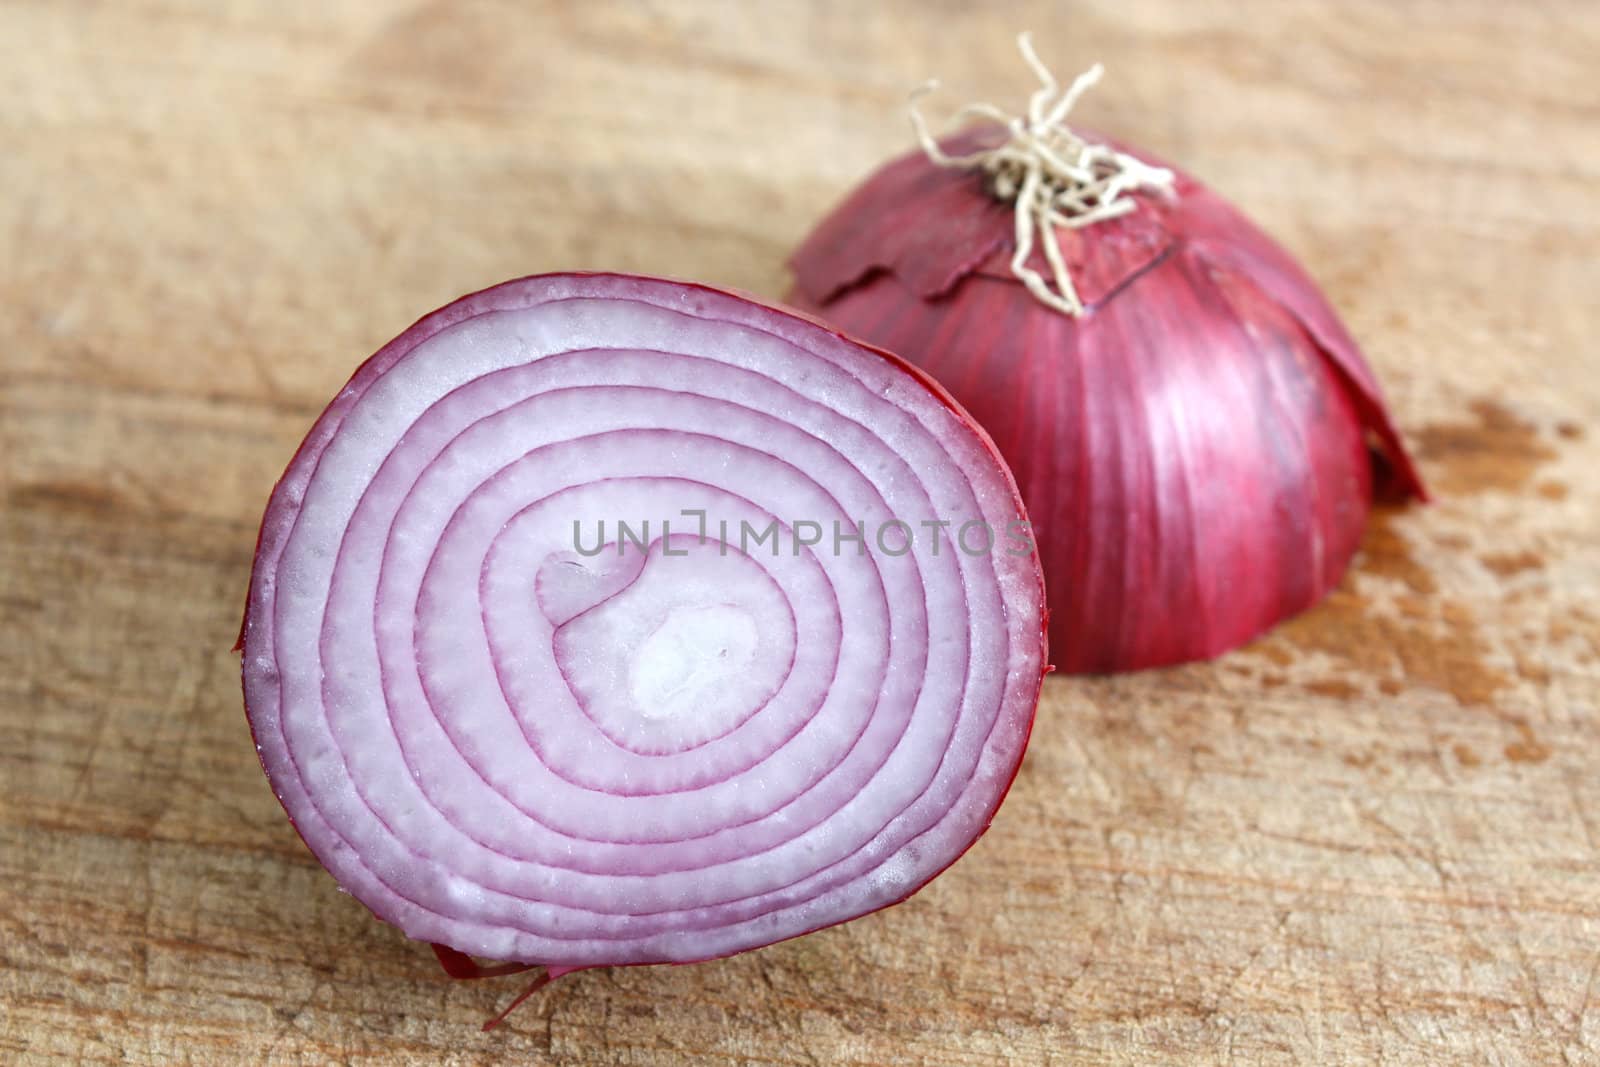 A red onion sliced in half